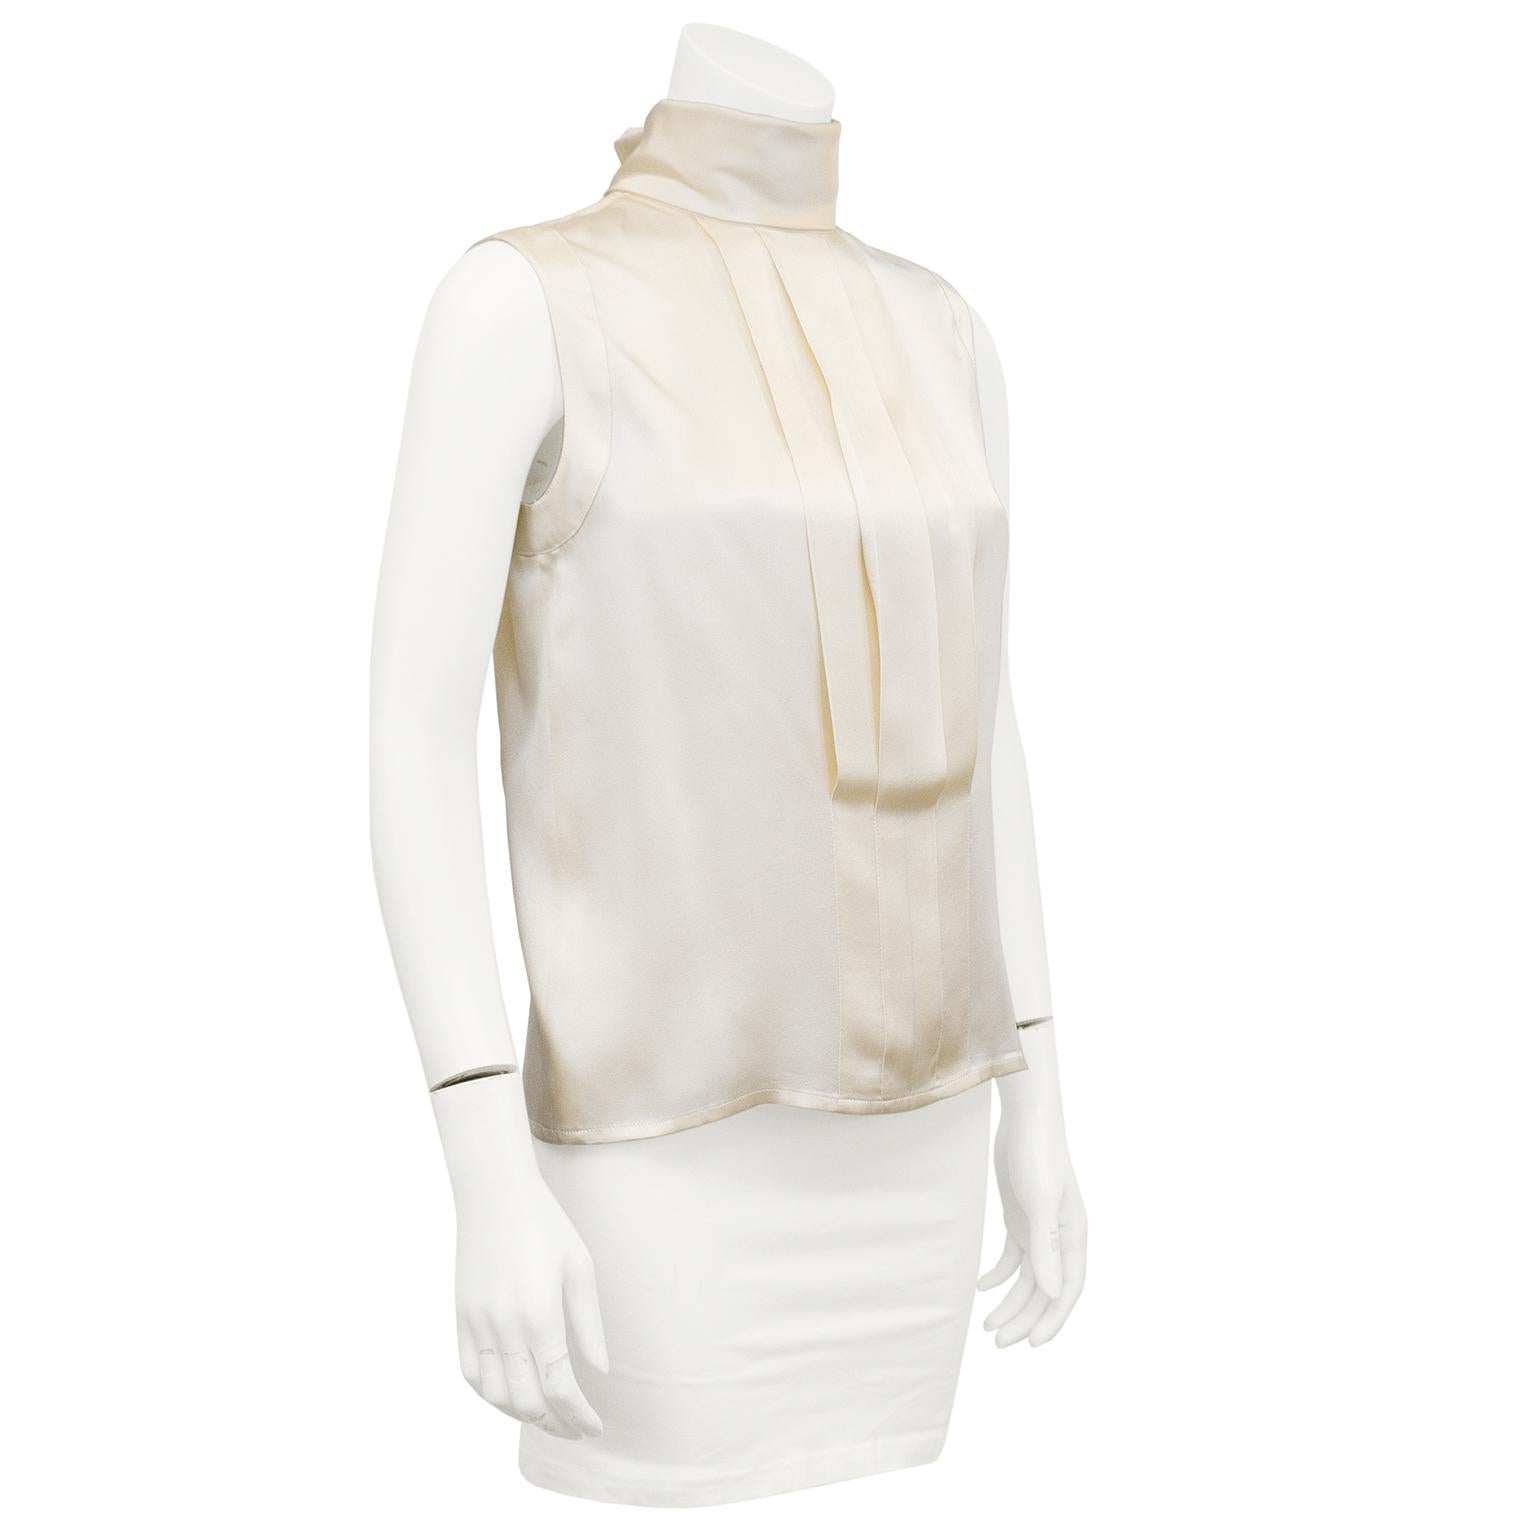 1990s Chanel cream silk blouse. Sleeveless with turtleneck collar. Flat pleated details at front. Button closures at back centre seam covered with pleat. French turned detail at nape of neck with small gold button engraved with the iconic Chanel